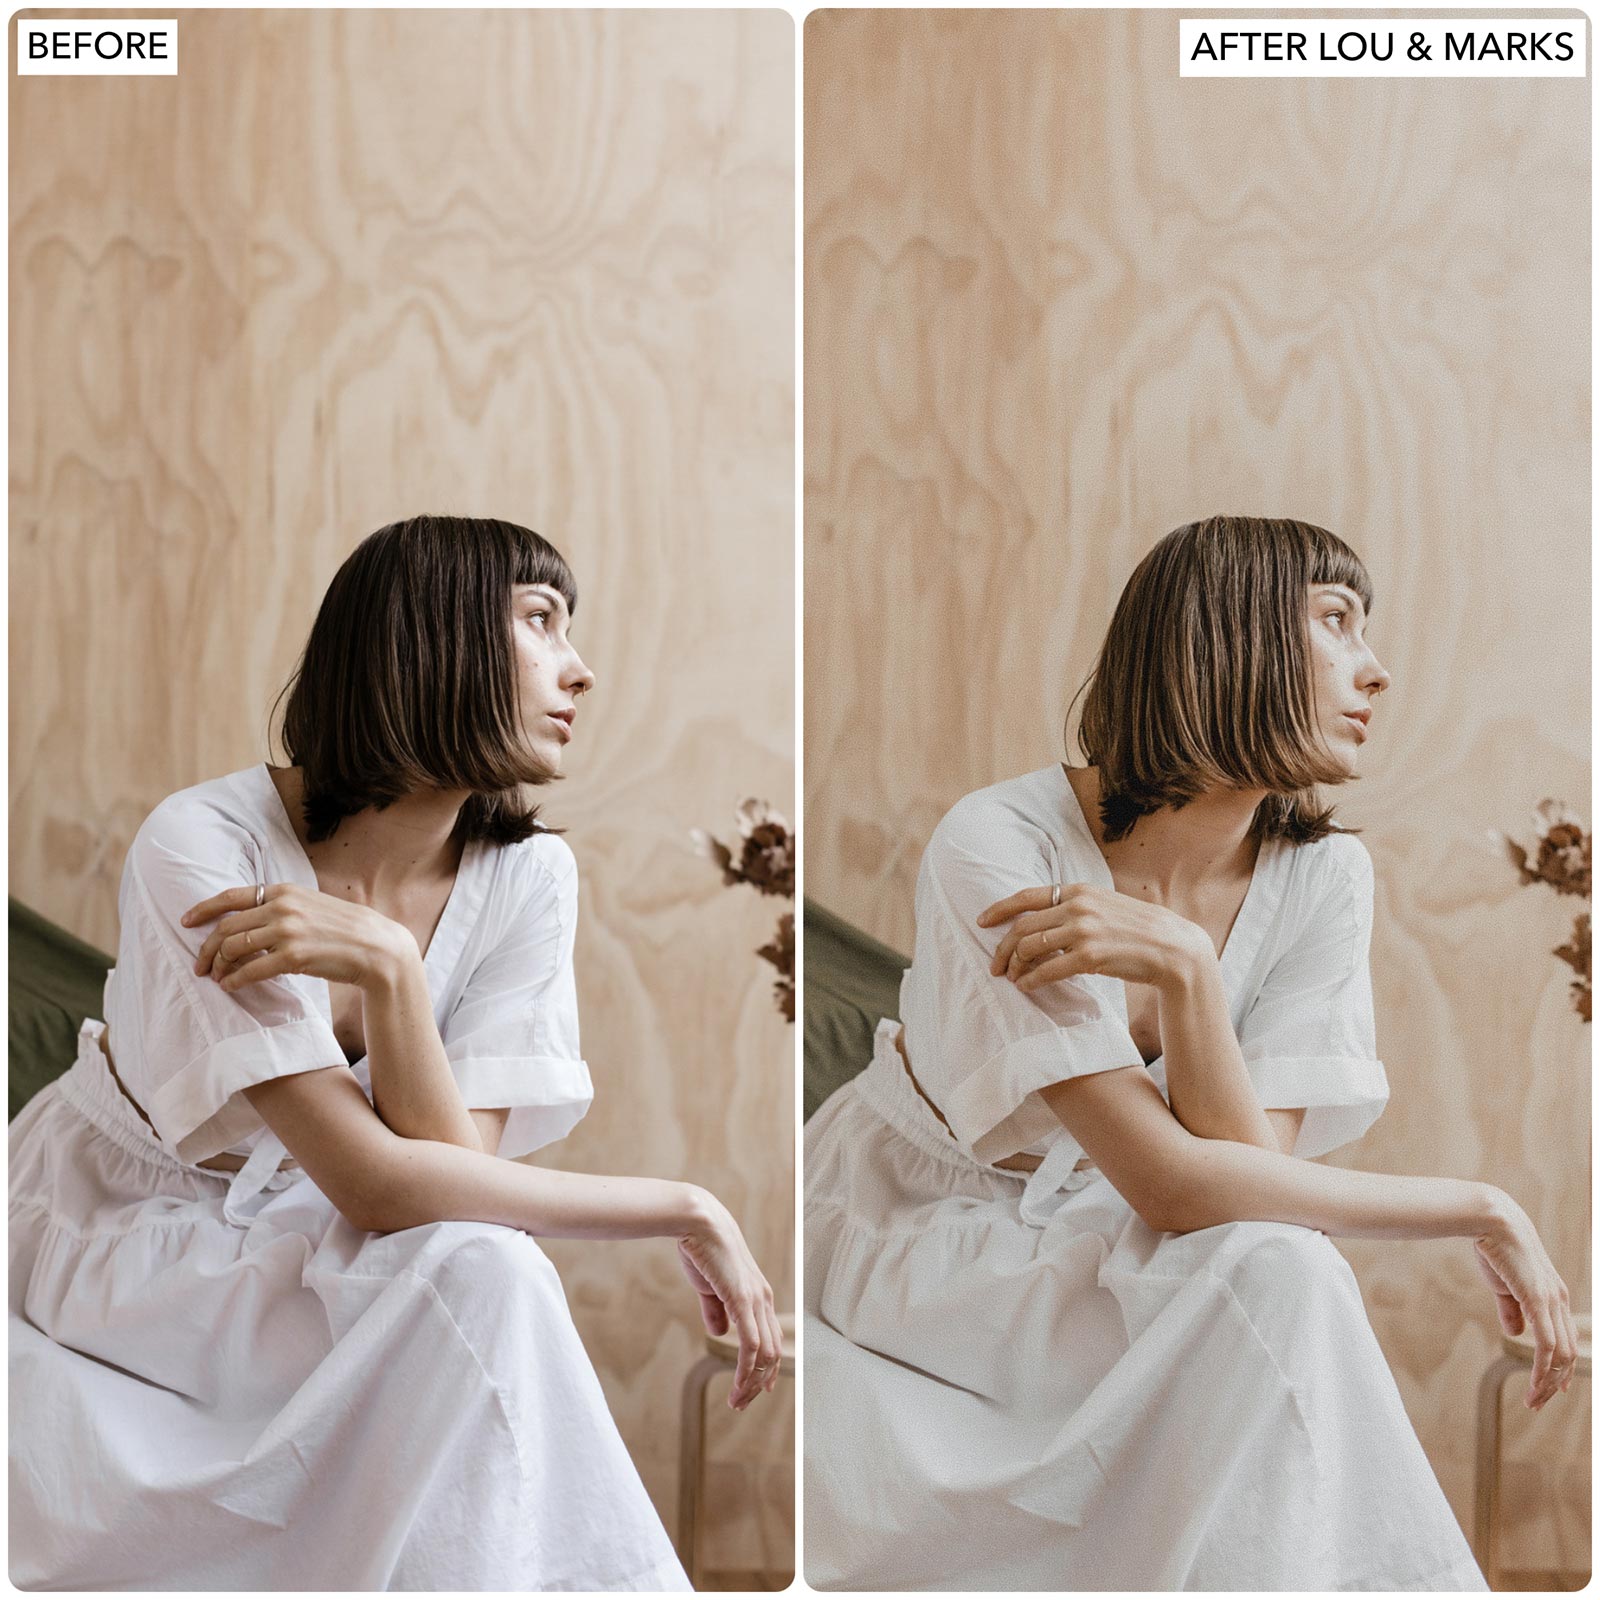 Creamy Film Filter For Adobe Lightroom Presets By Lou And Marks Presets After